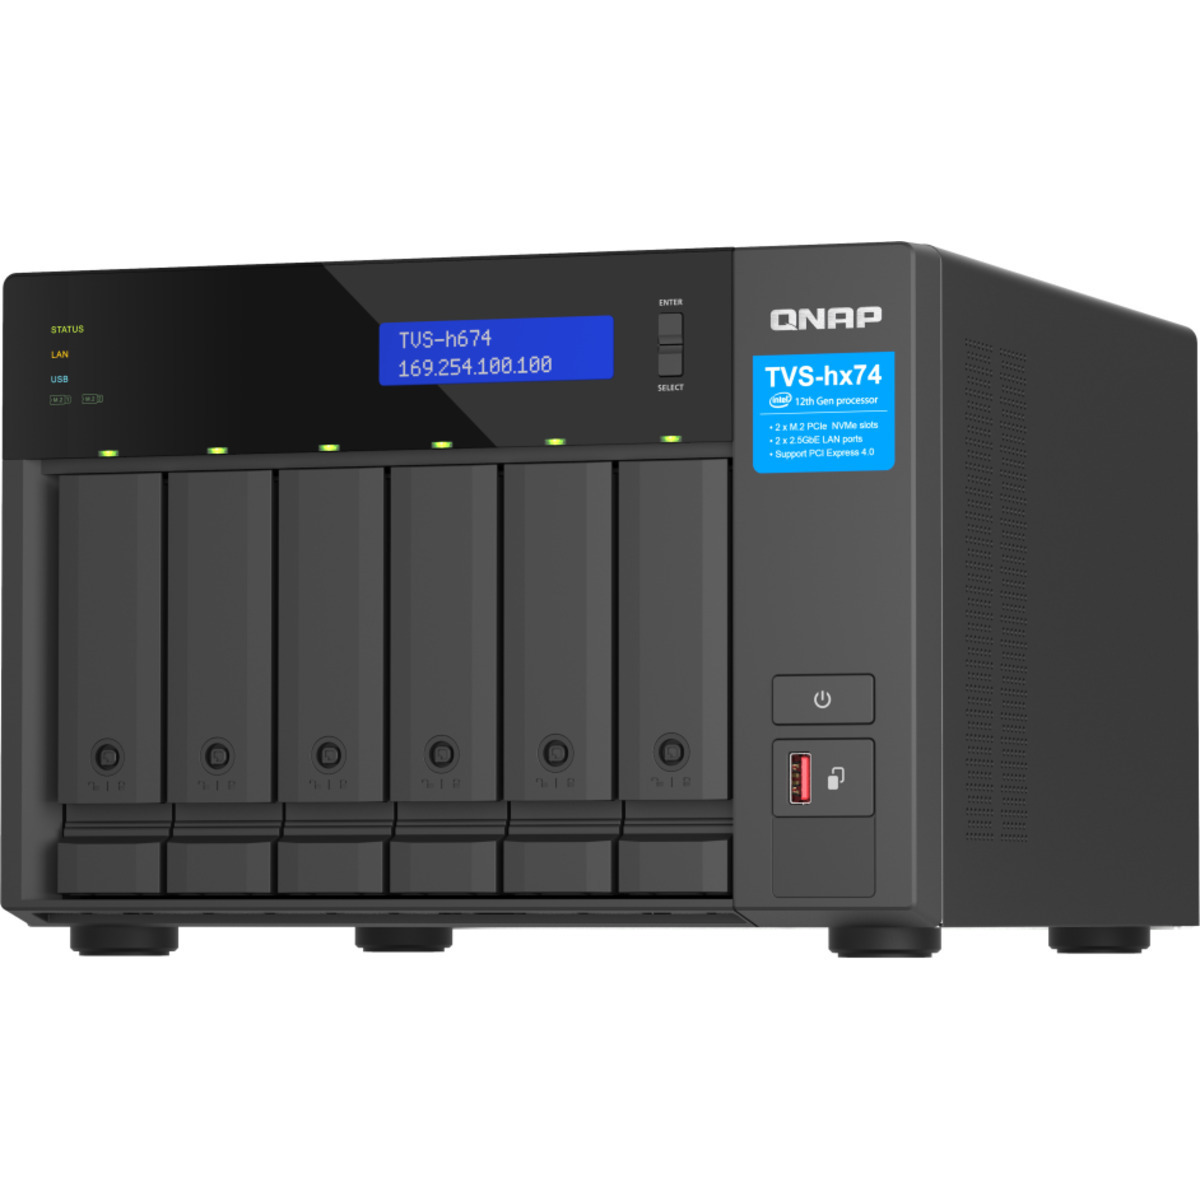 buy $3198 QNAP TVS-h674 Core i5 48tb Desktop NAS - Network Attached Storage Device 6x8000gb Toshiba Enterprise Capacity MG08ADA800E 3.5 7200rpm SATA 6Gb/s HDD ENTERPRISE Class Drives Installed - Burn-In Tested - ON SALE - nas headquarters buy network attached storage server device das new raid-5 free shipping usa TVS-h674 Core i5